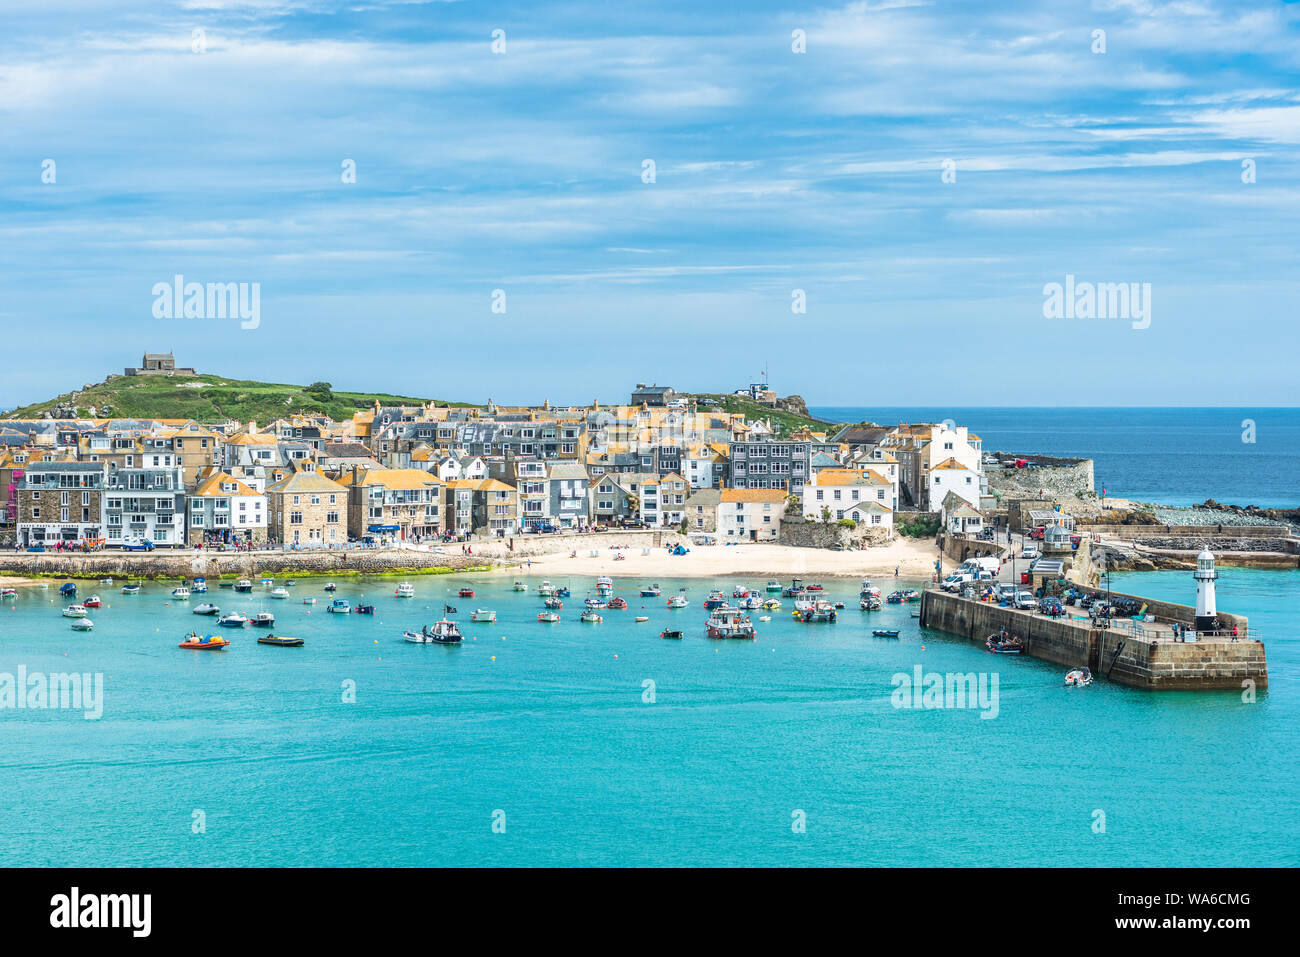 Elevated views of the popular seaside resort of St. Ives, Cornwall, England, United Kingdom, Europe Stock Photo